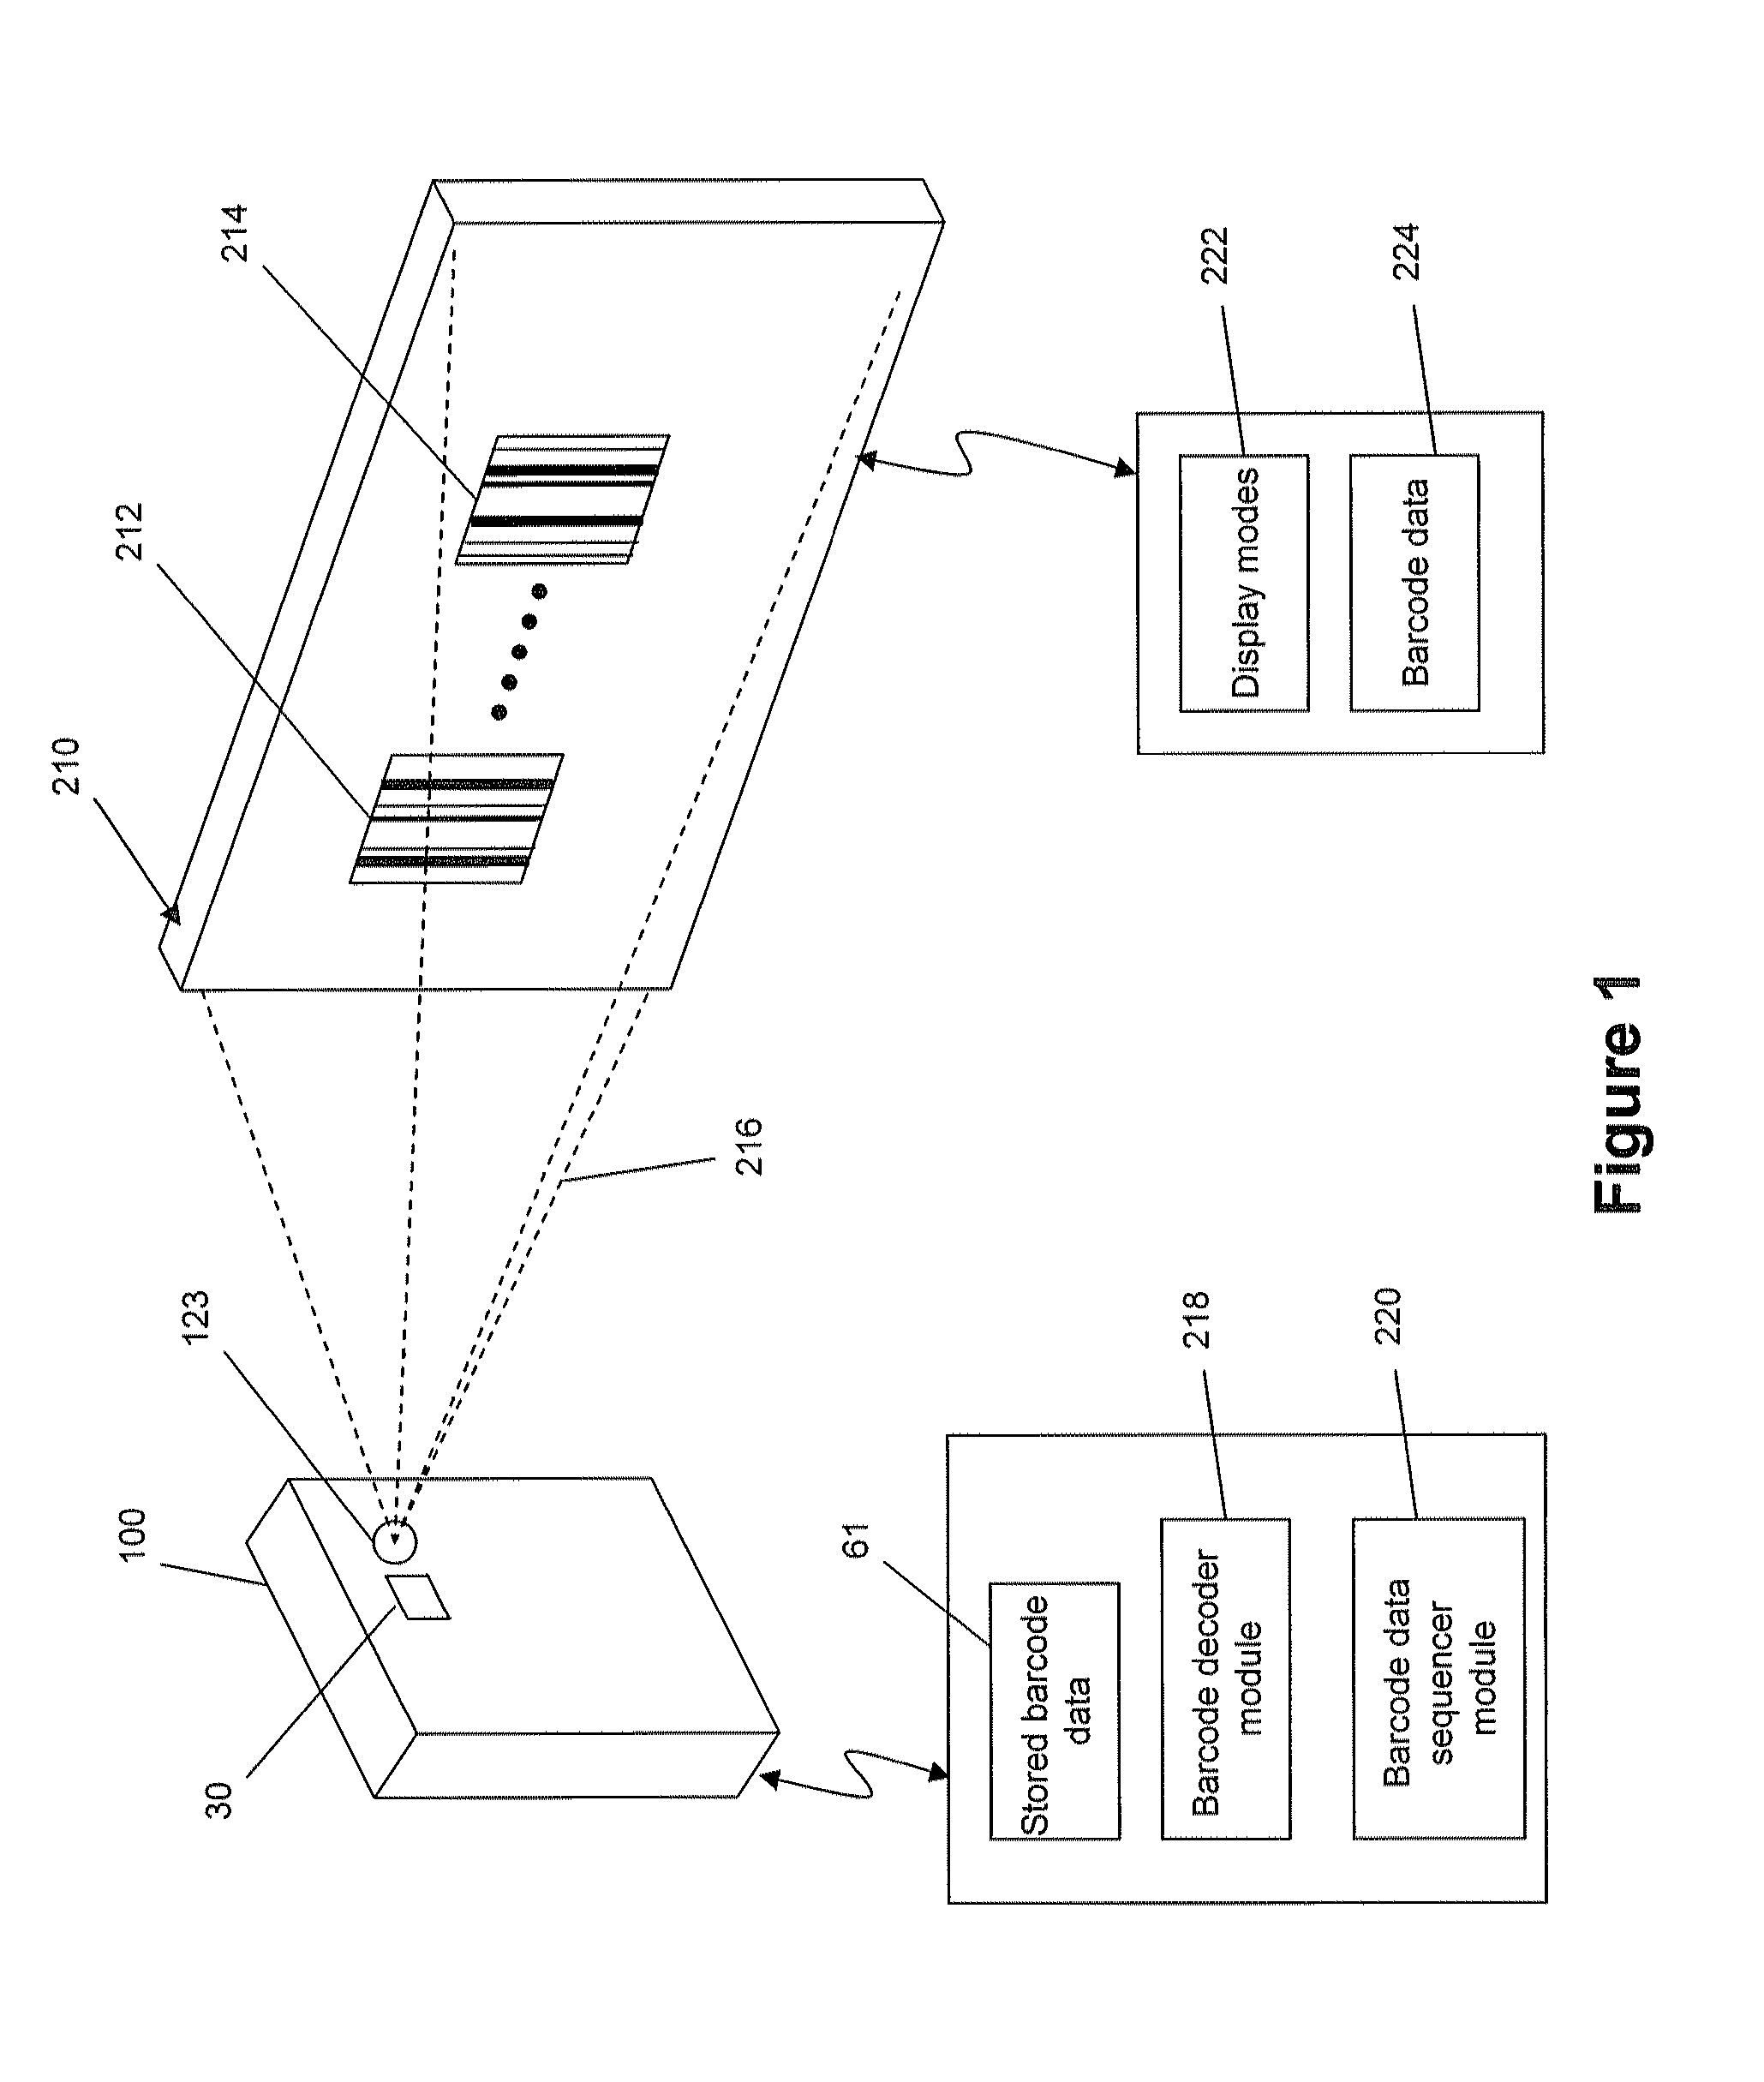 System and method for data transfer through animated barcodes